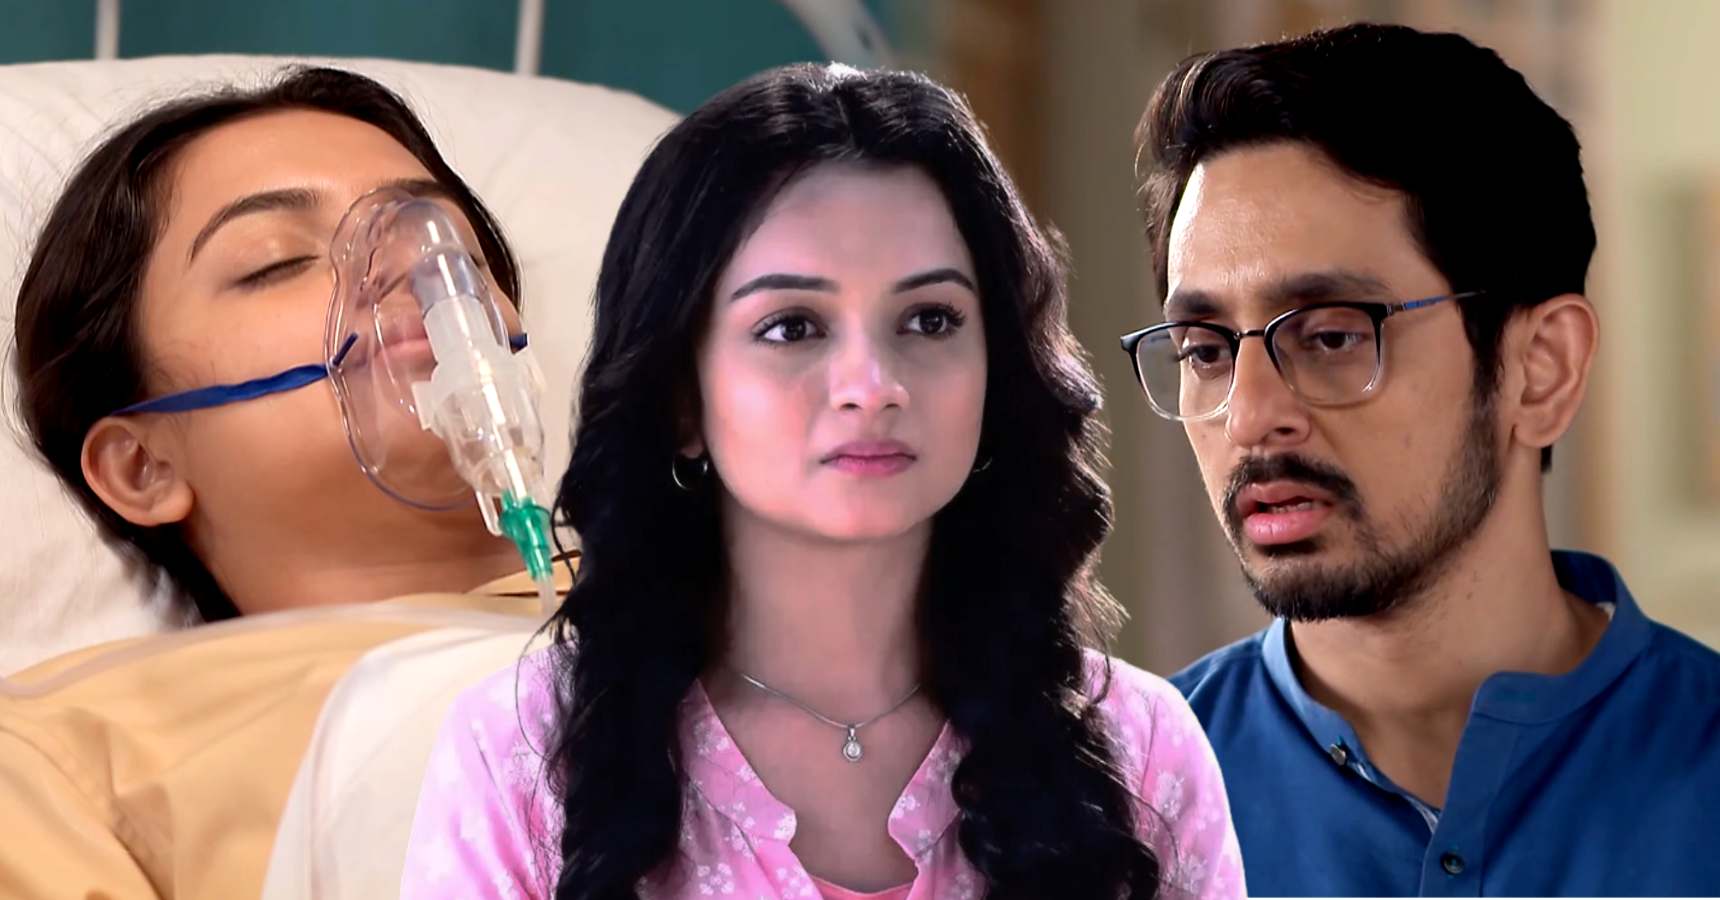 Will Icche Putul Serial end with Megh's Death Speculation in Social Media